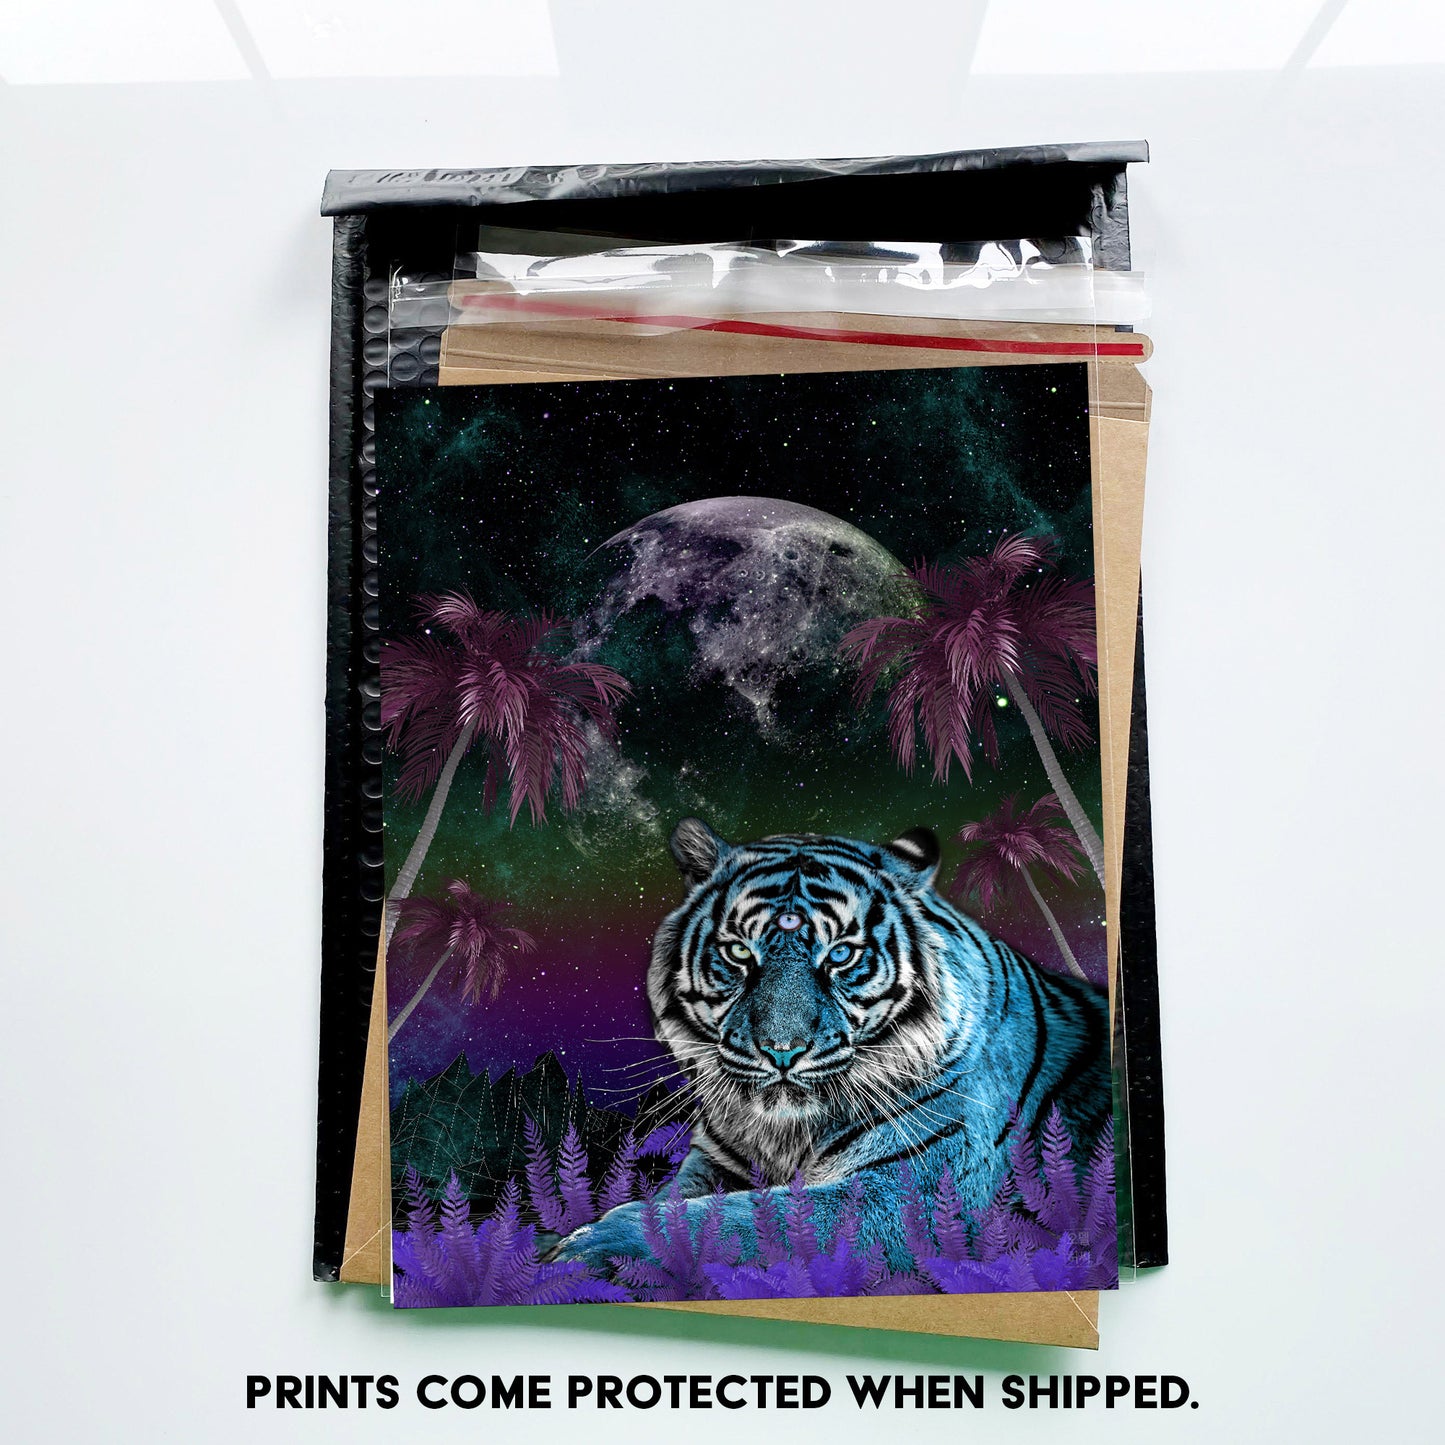 Blue Tiger Night 8.5 X 11 Inch Print for Sci-Fi & Surreal Art Fans, great gift for home decor and room design